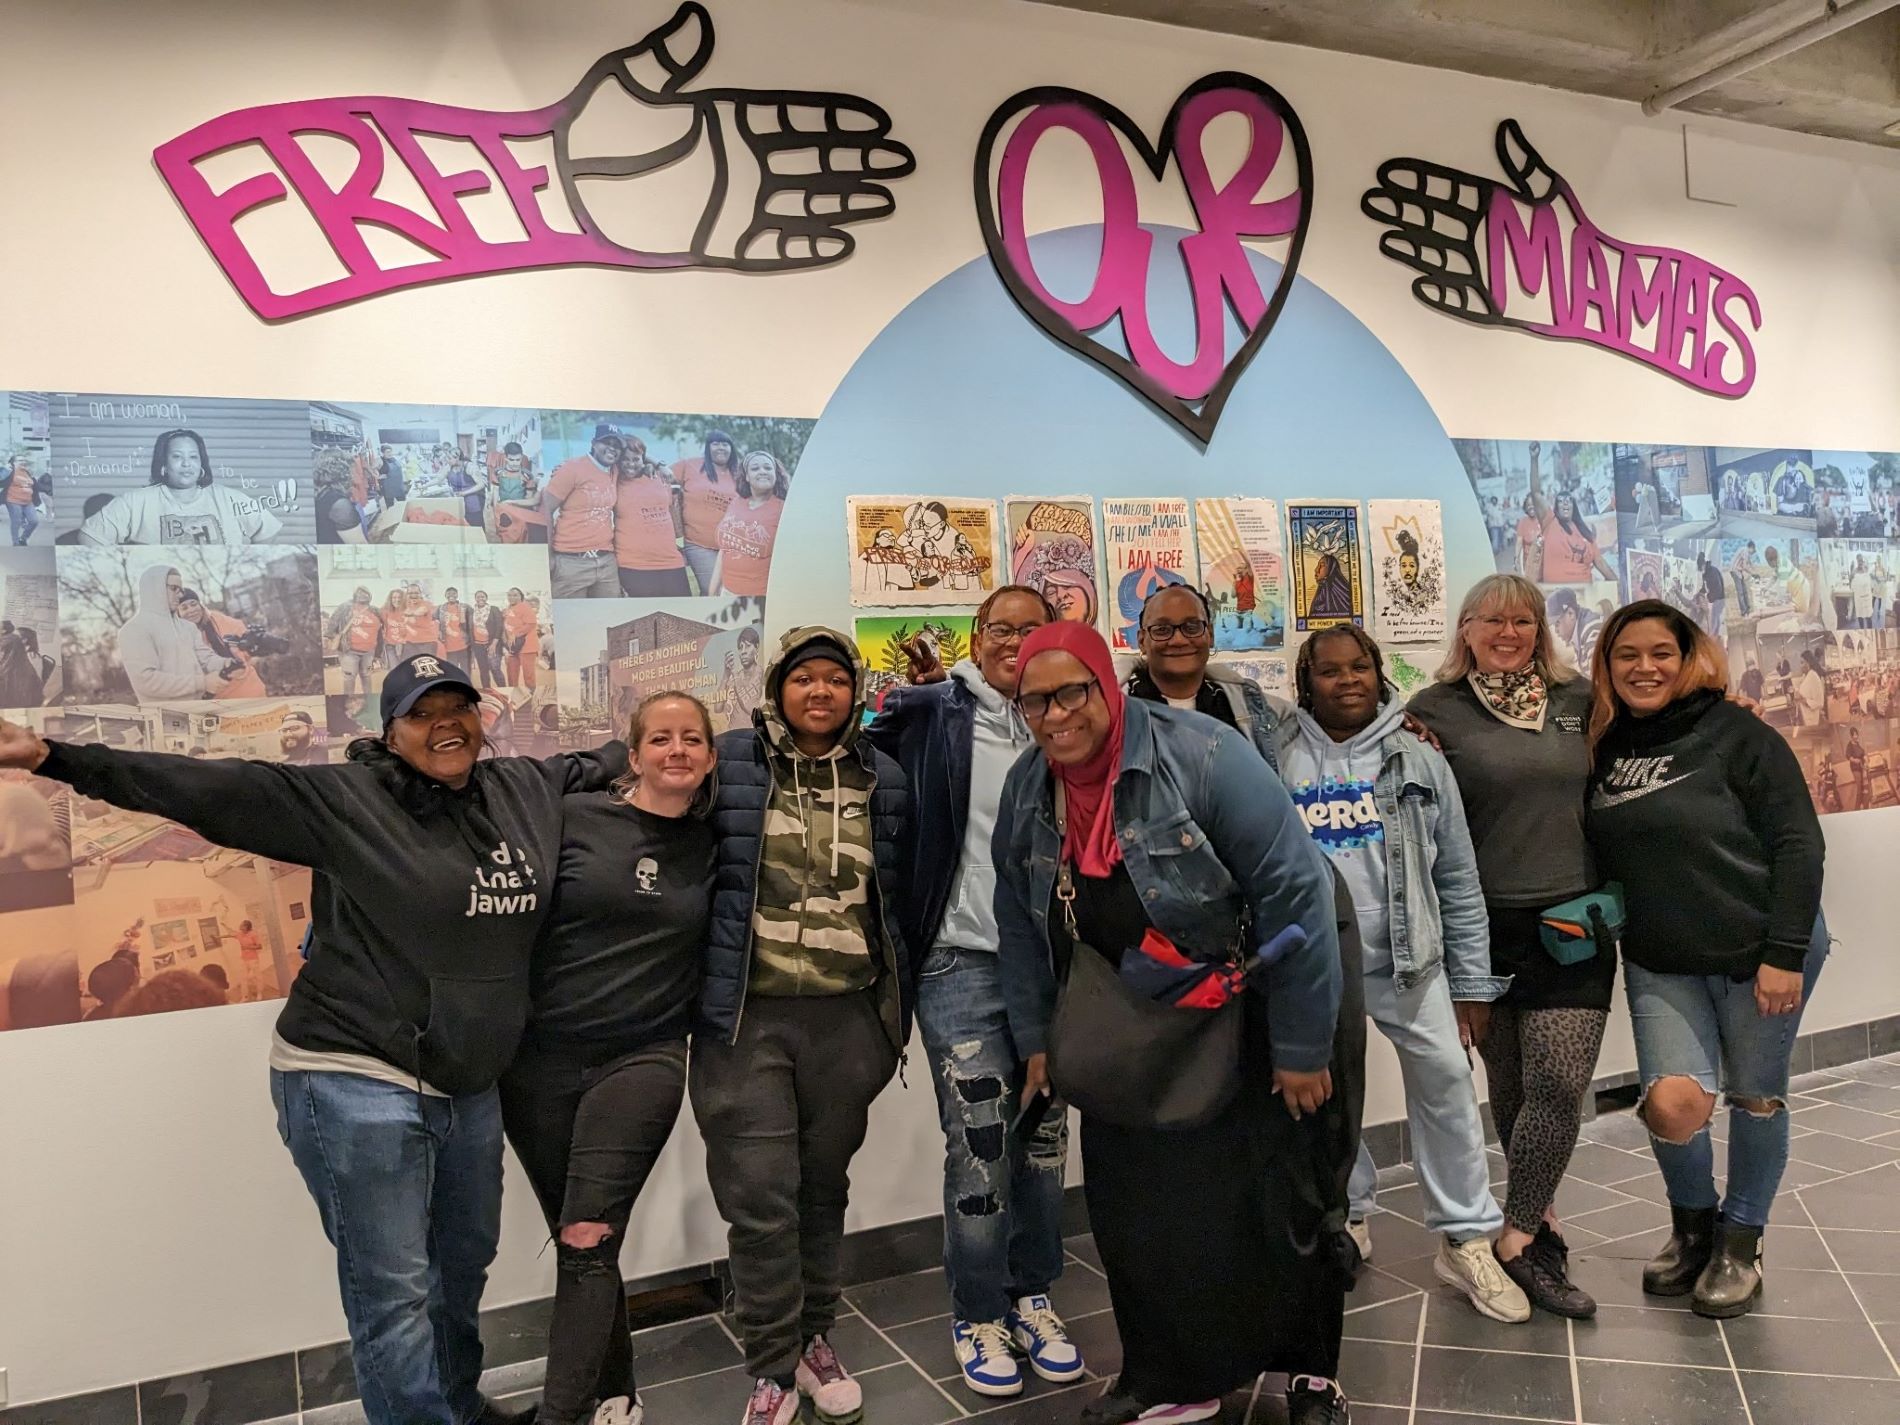 Kali poses with 8 other women in front of a sign that says free our mamas